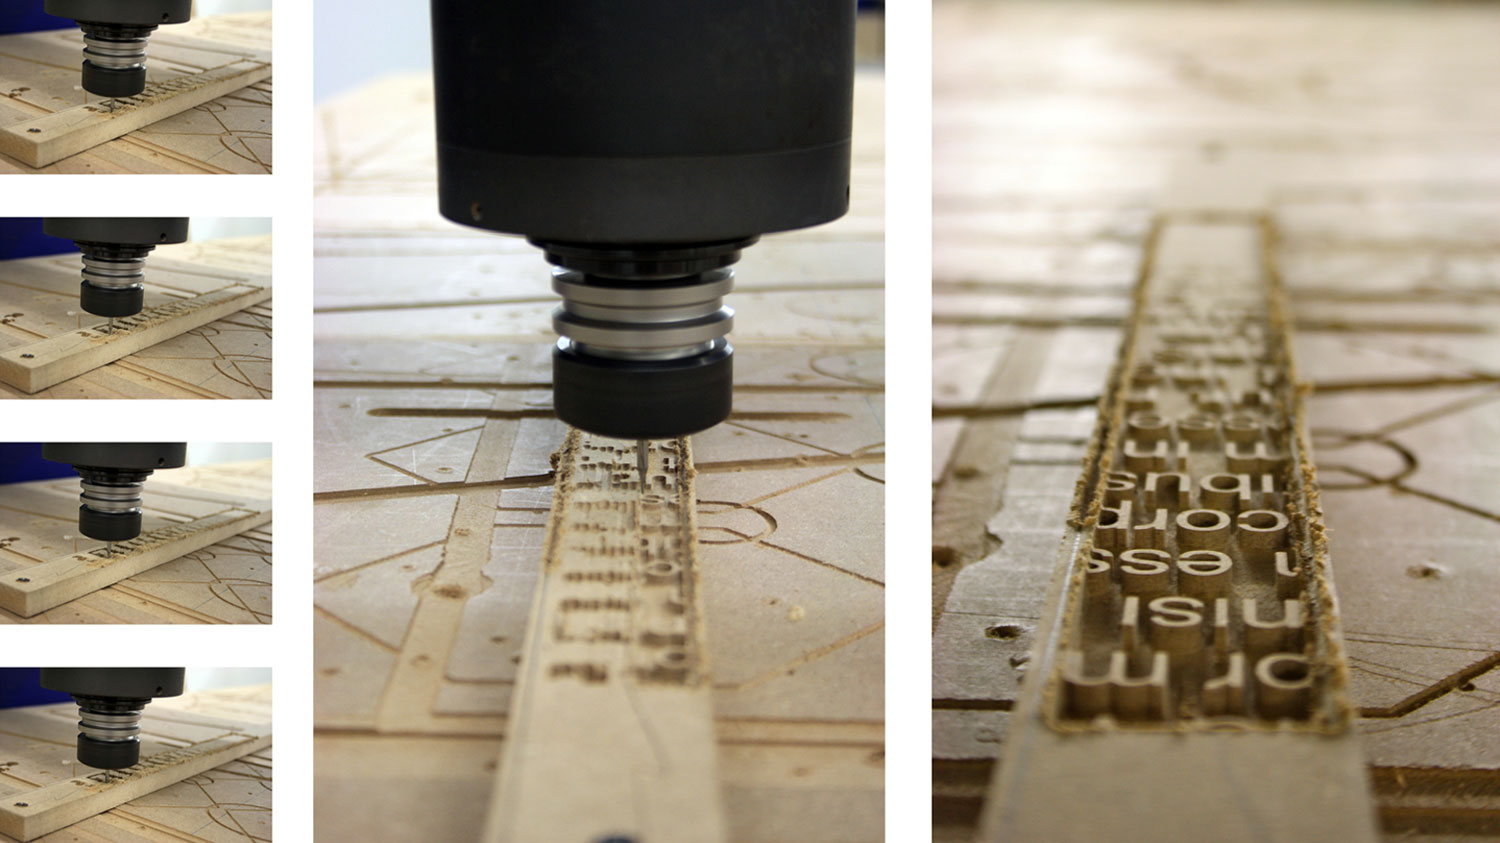 CNC routing tests using different diameter bits